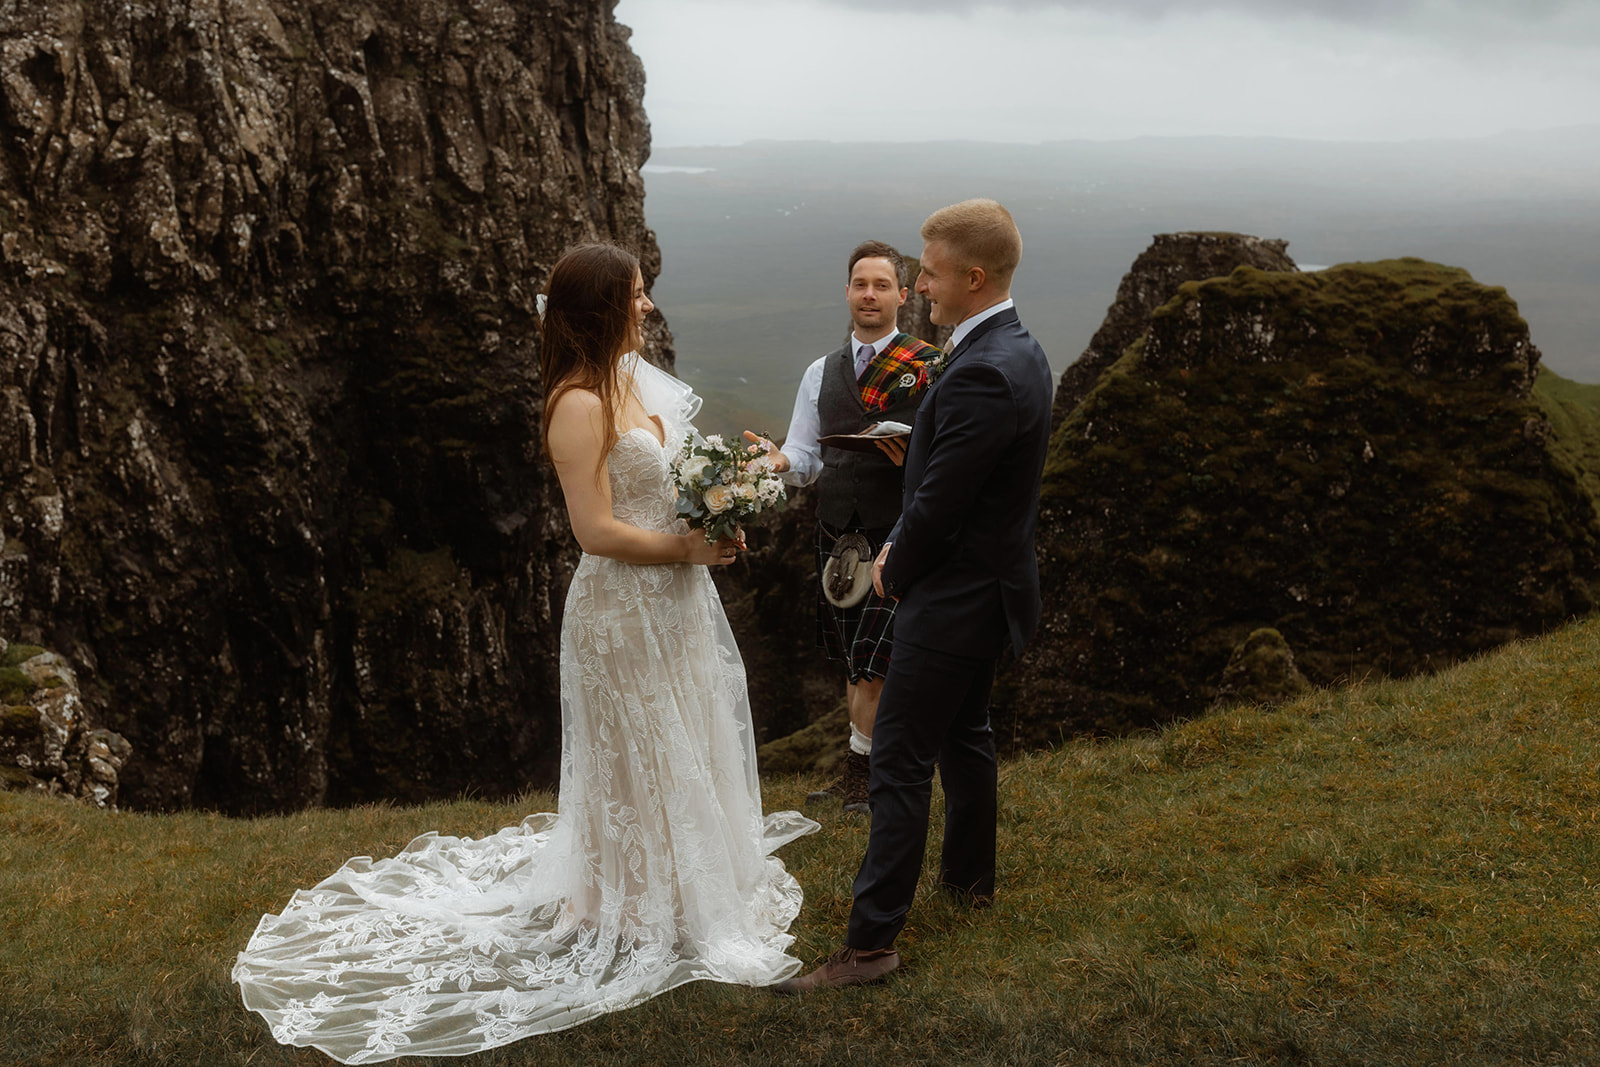 Witness Emma and Matthew's enchanting elopement ceremony amidst the mystical Quiraing, Isle of Skye.